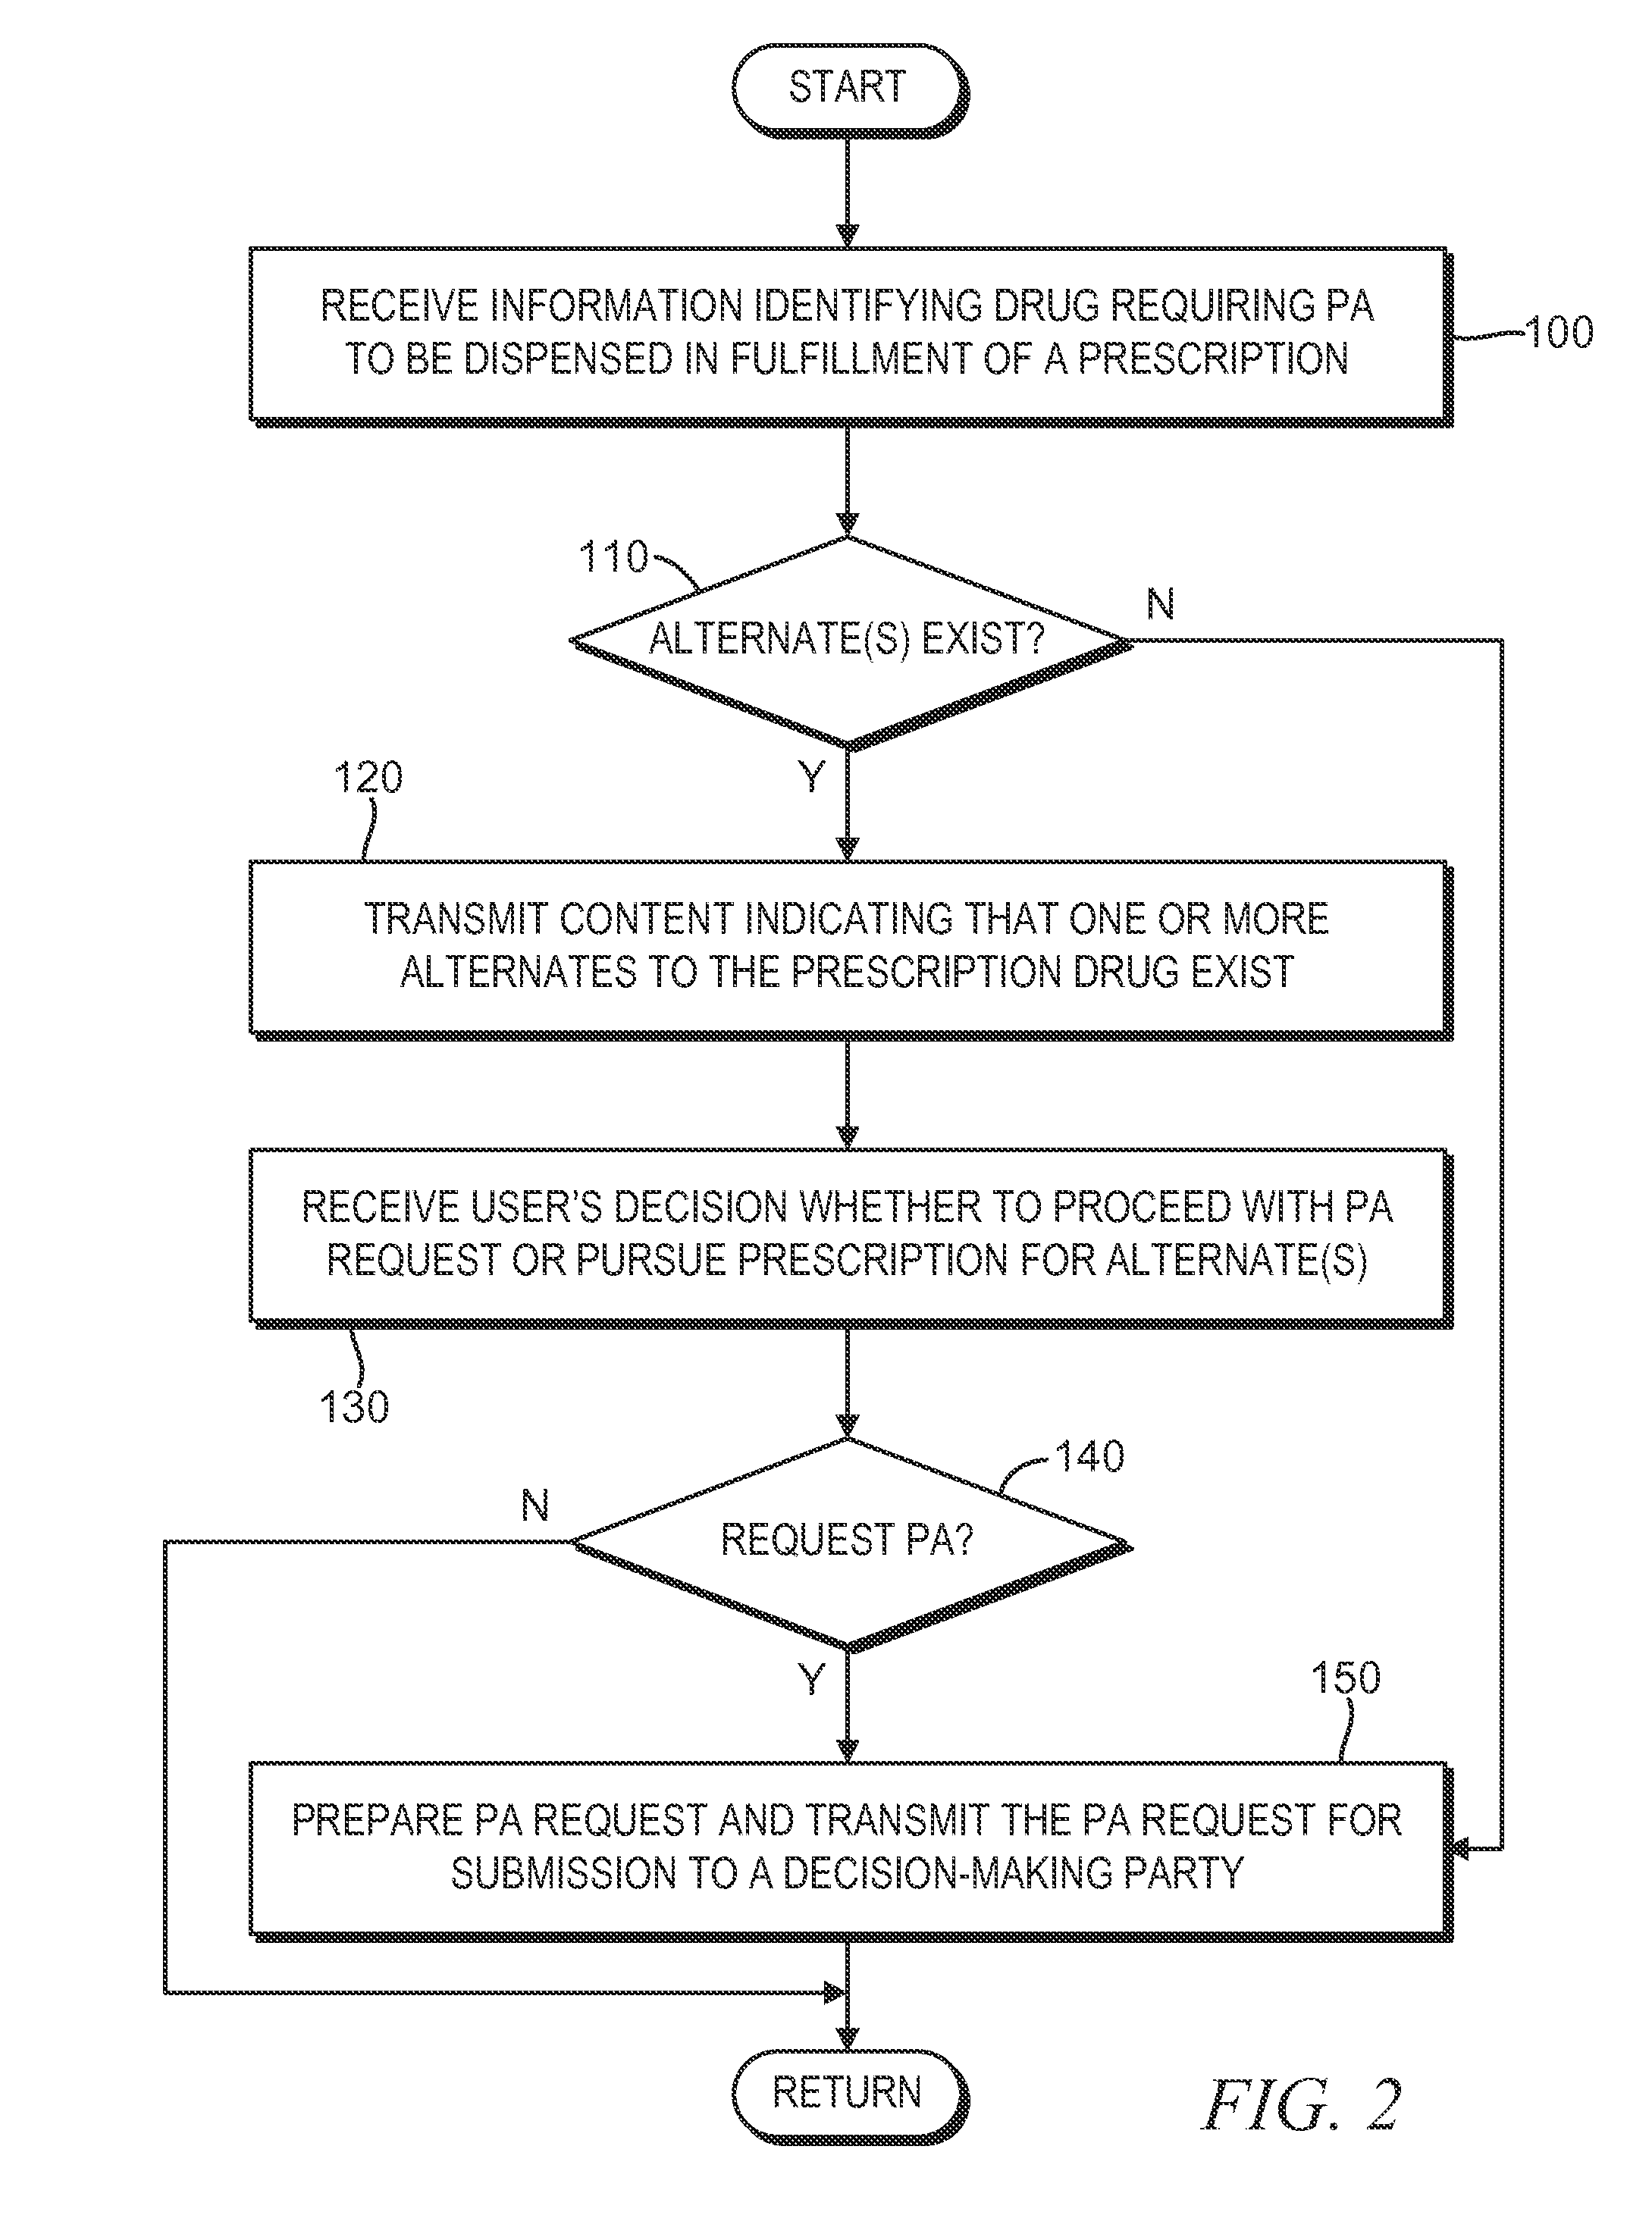 Method and apparatus for recommending an alternative to a prescription drug requiring prior authorization